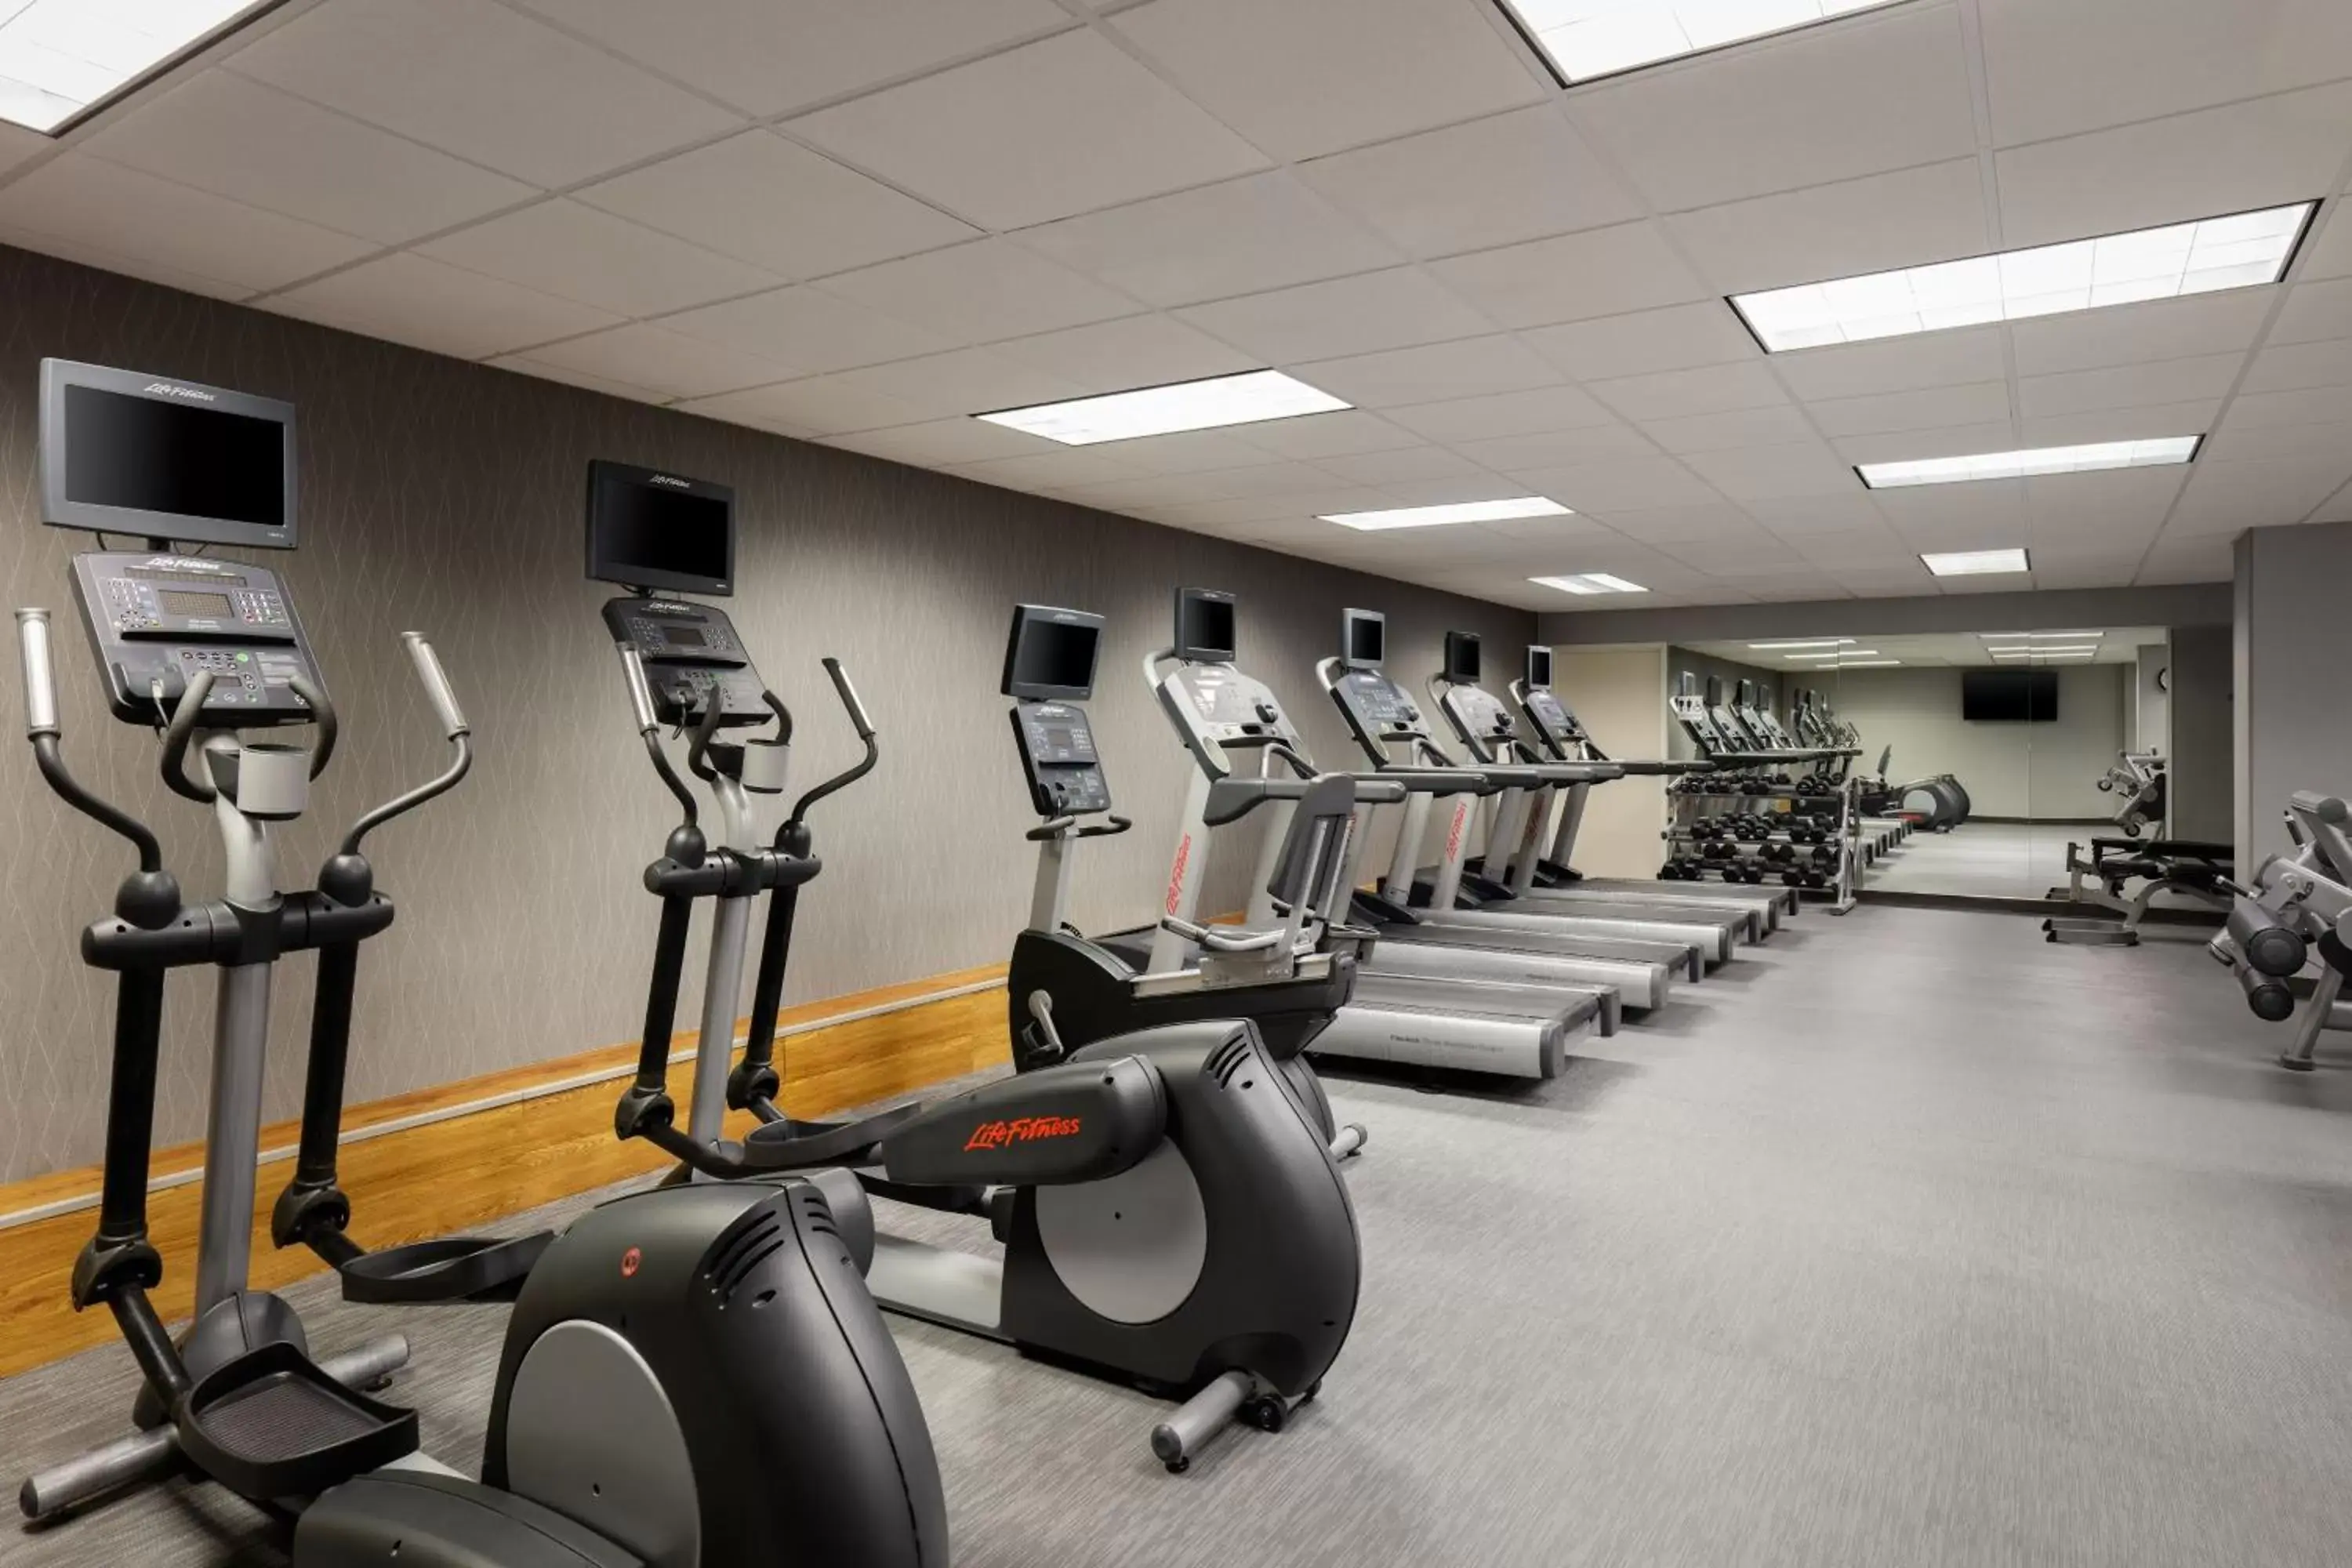 Fitness centre/facilities, Fitness Center/Facilities in Courtyard by Marriott Wichita at Old Town